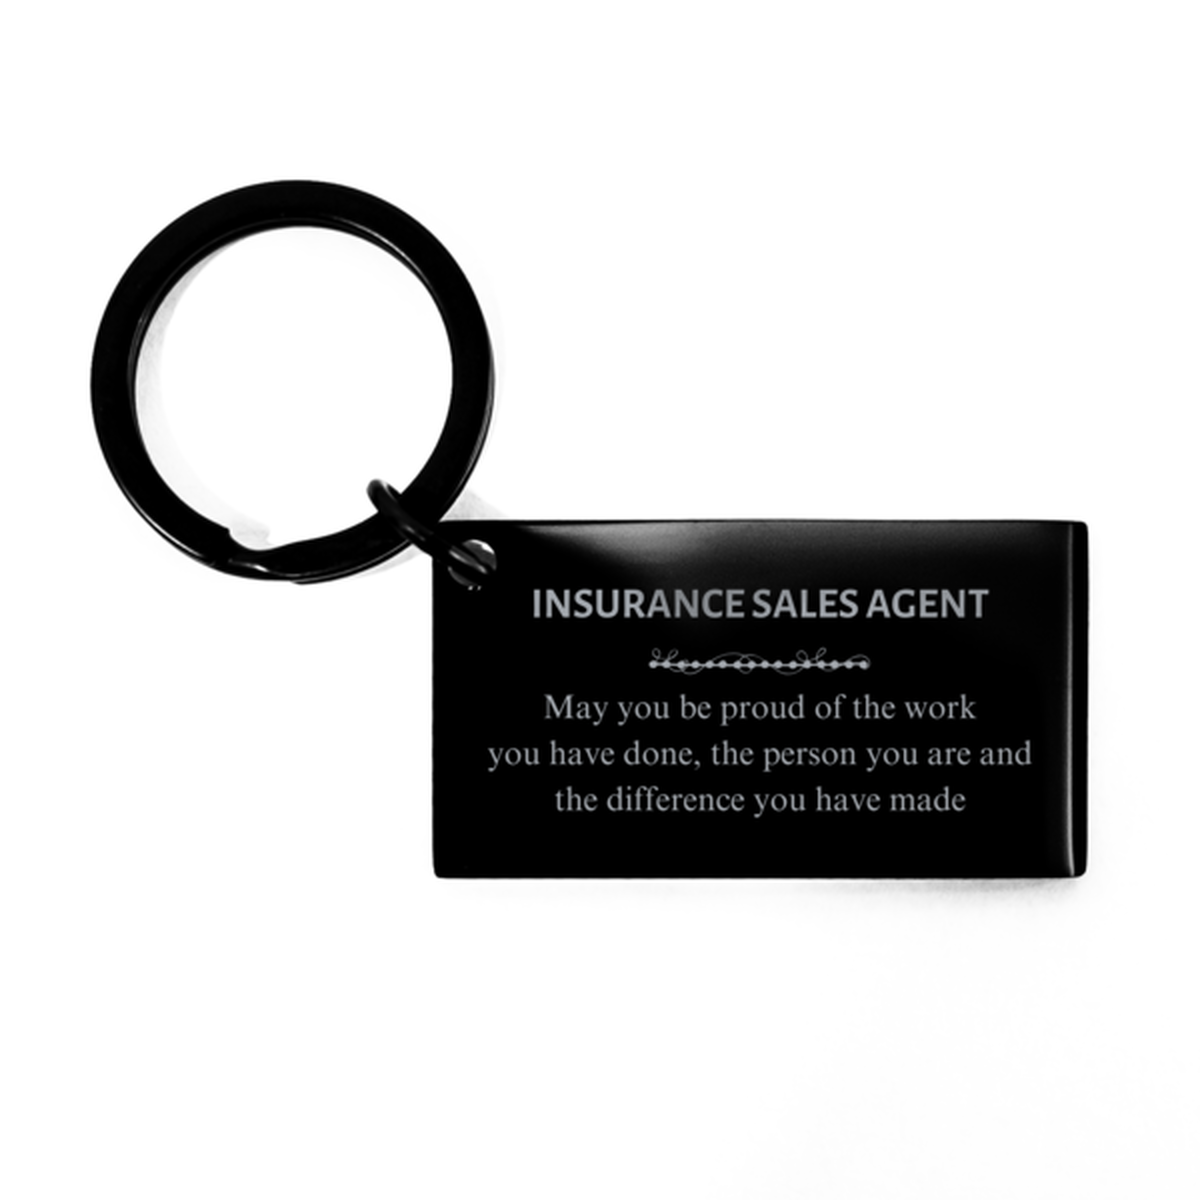 Missionary May you be proud of the work you have done, Retirement Insurance Sales Agent Keychain for Colleague Appreciation Gifts Amazing for Insurance Sales Agent